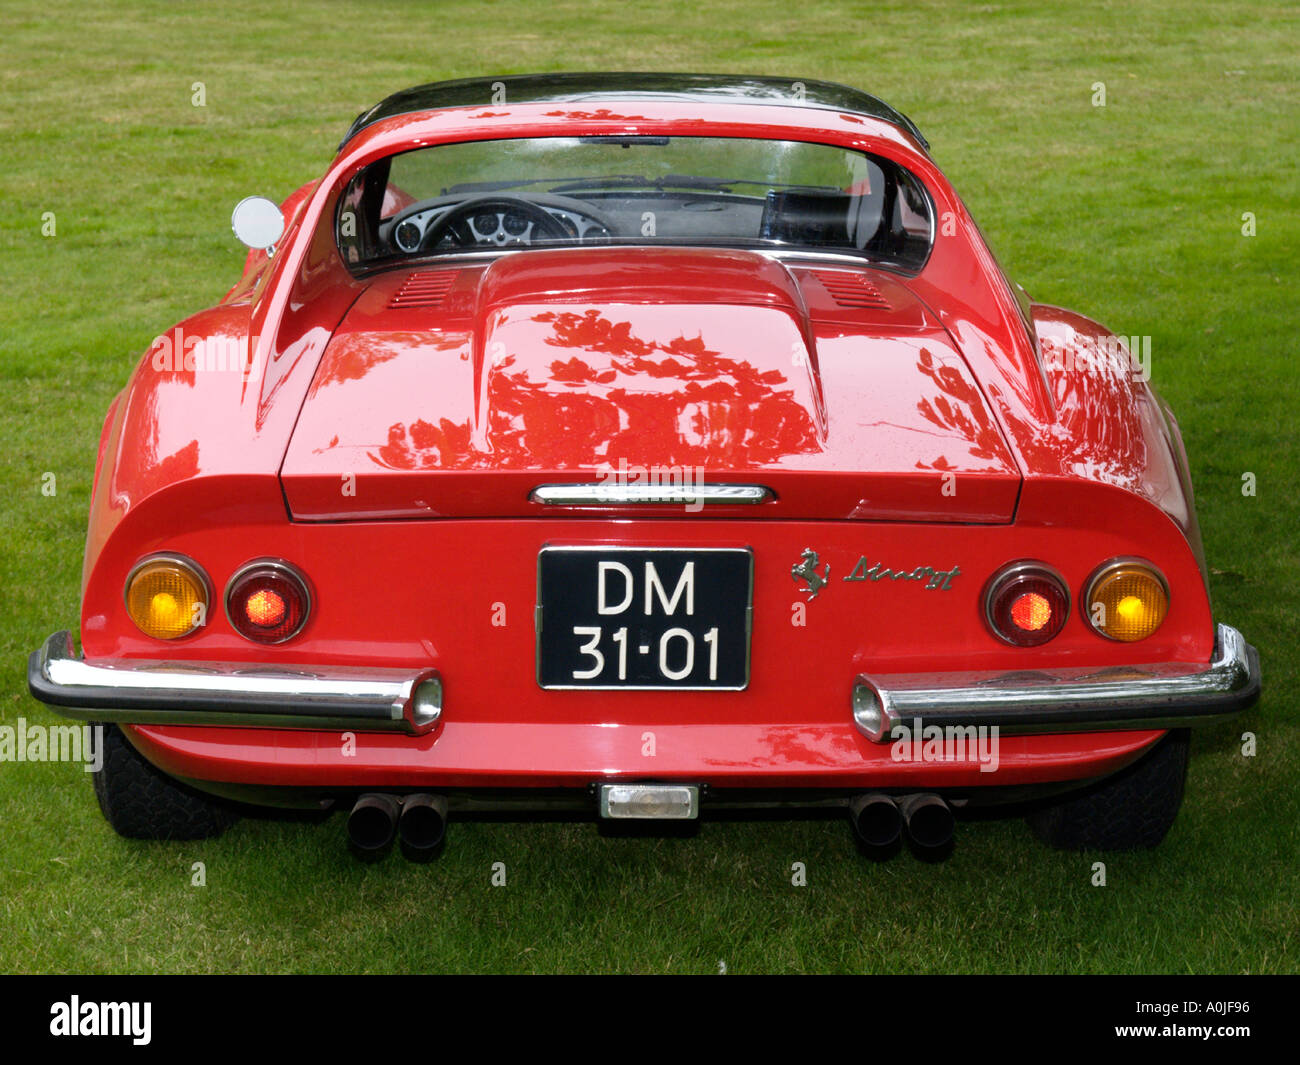 Rear side of a classic red Ferrari Dino 246 GT parked on the grass Stock Photo